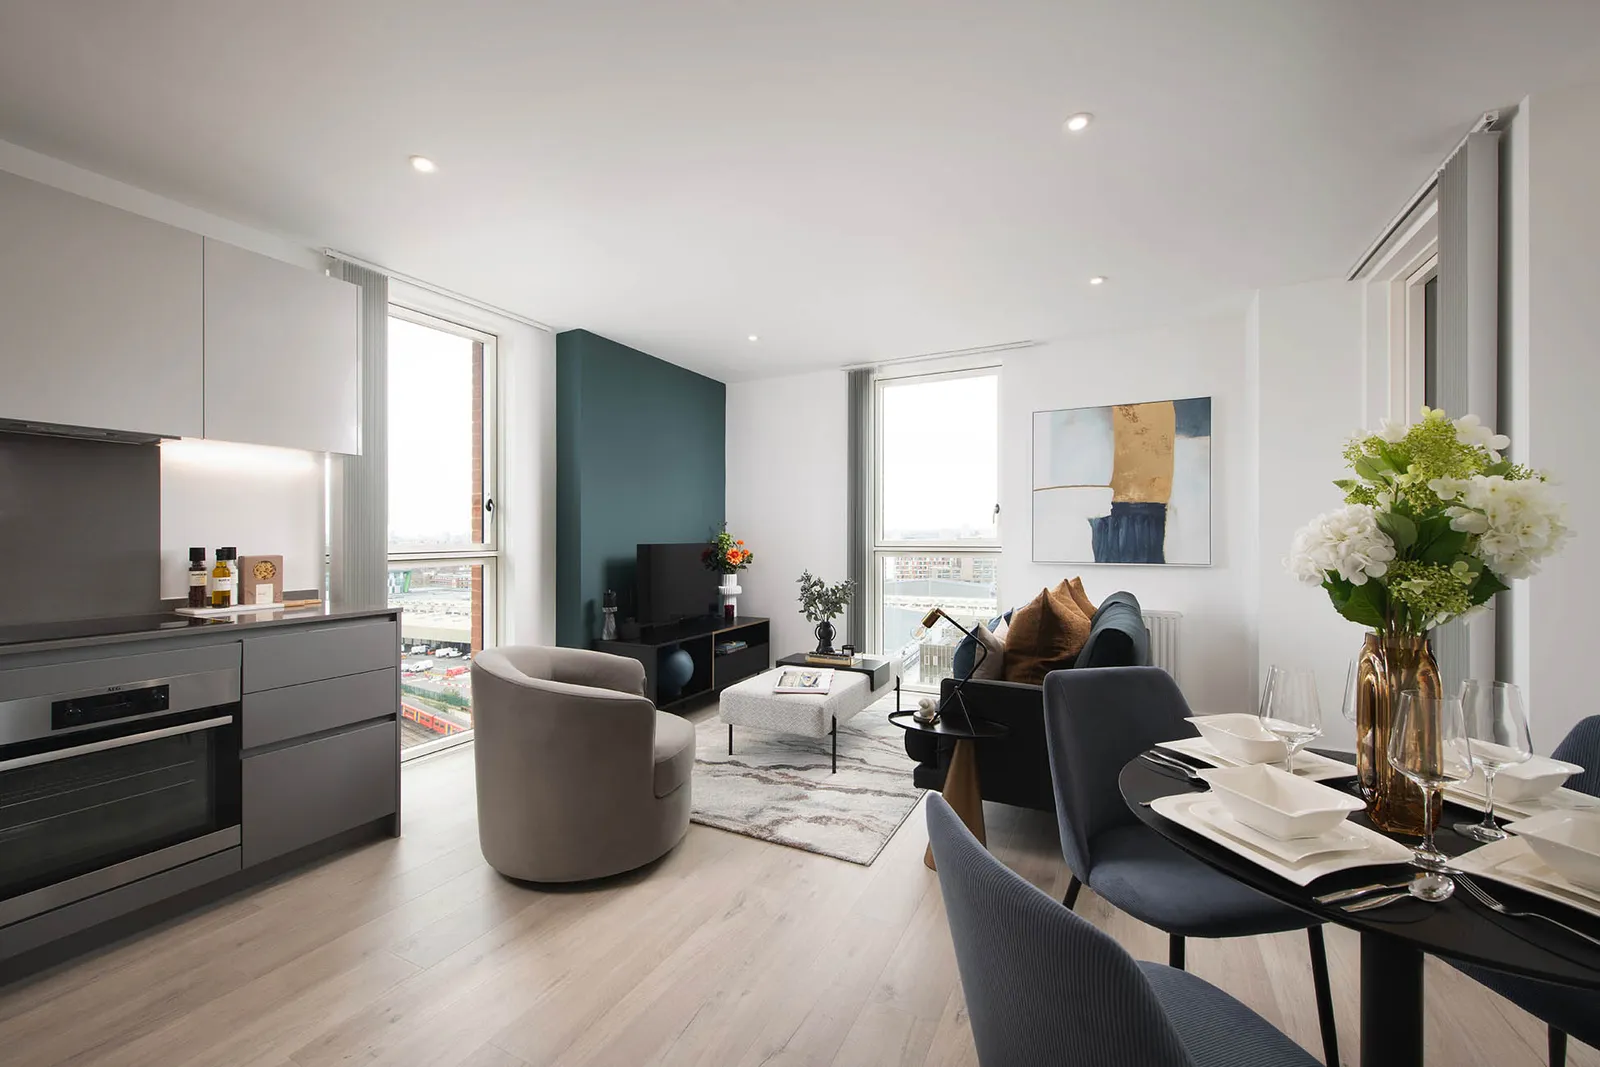 New Mansion Square battersea shared ownership